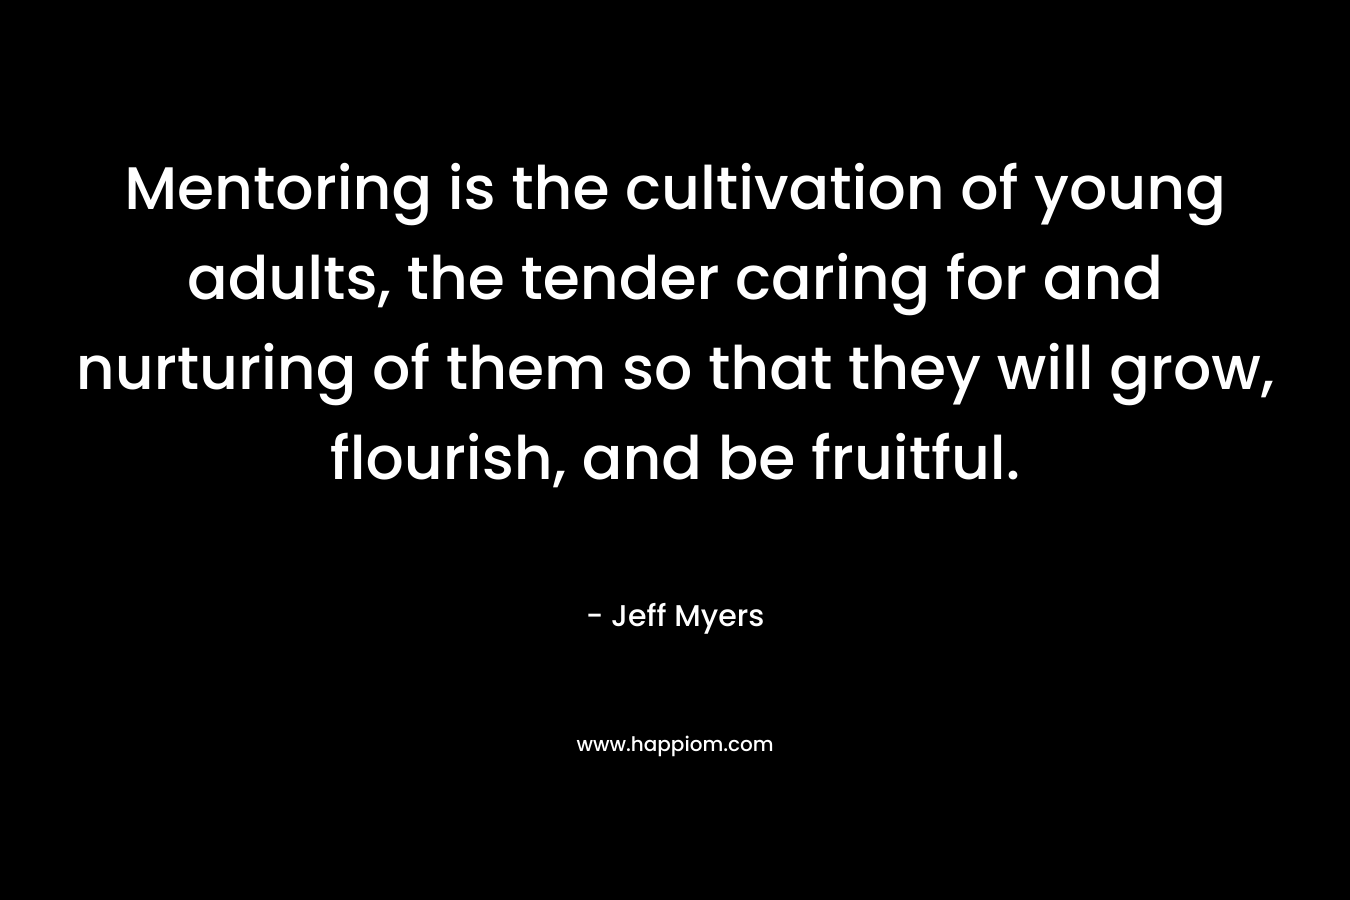 Mentoring is the cultivation of young adults, the tender caring for and nurturing of them so that they will grow, flourish, and be fruitful. – Jeff Myers